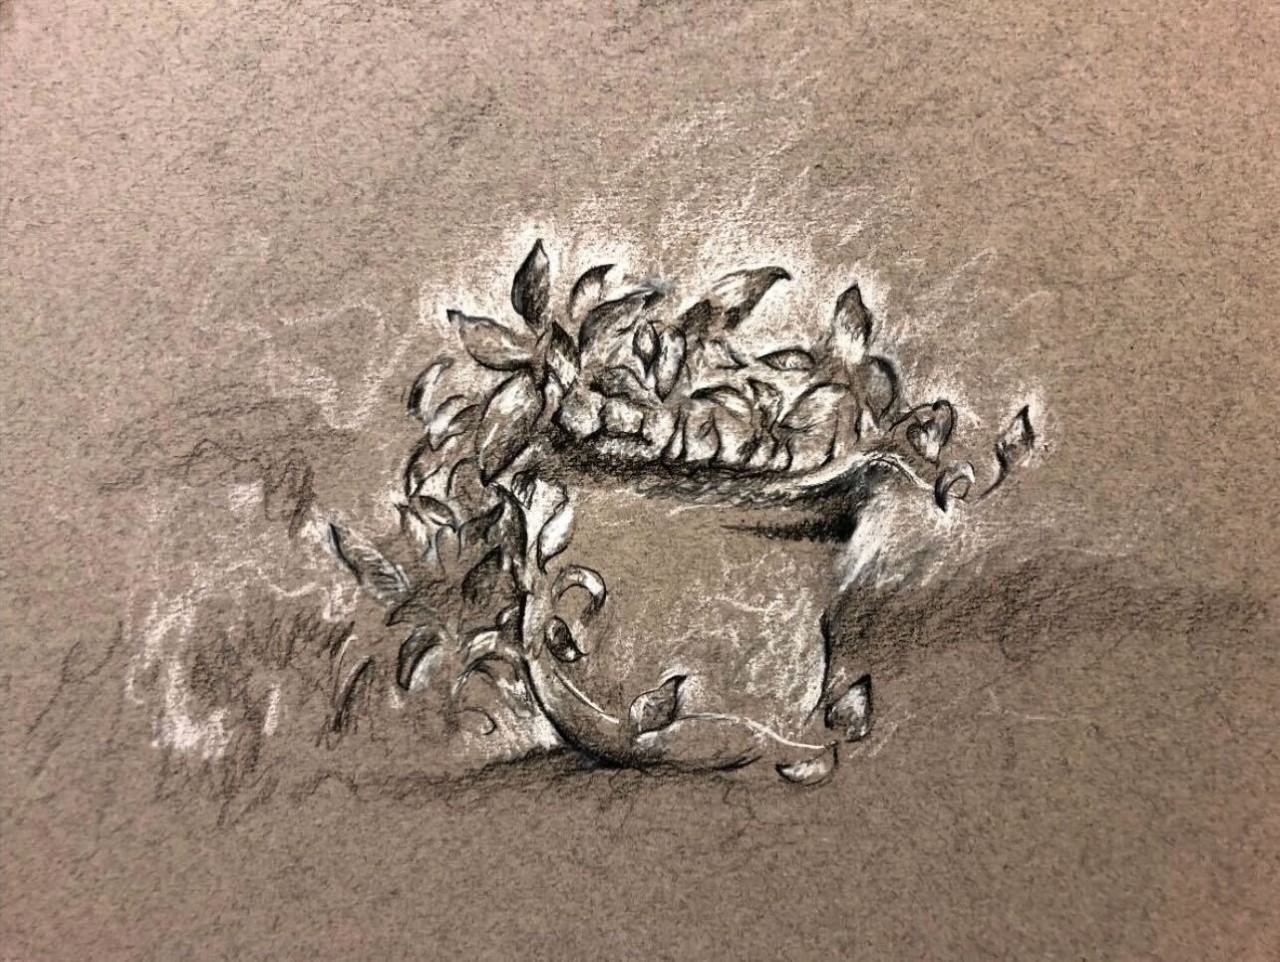 Single black and white still life drawing of a plant in a pot with leaves and small vines flowing out.